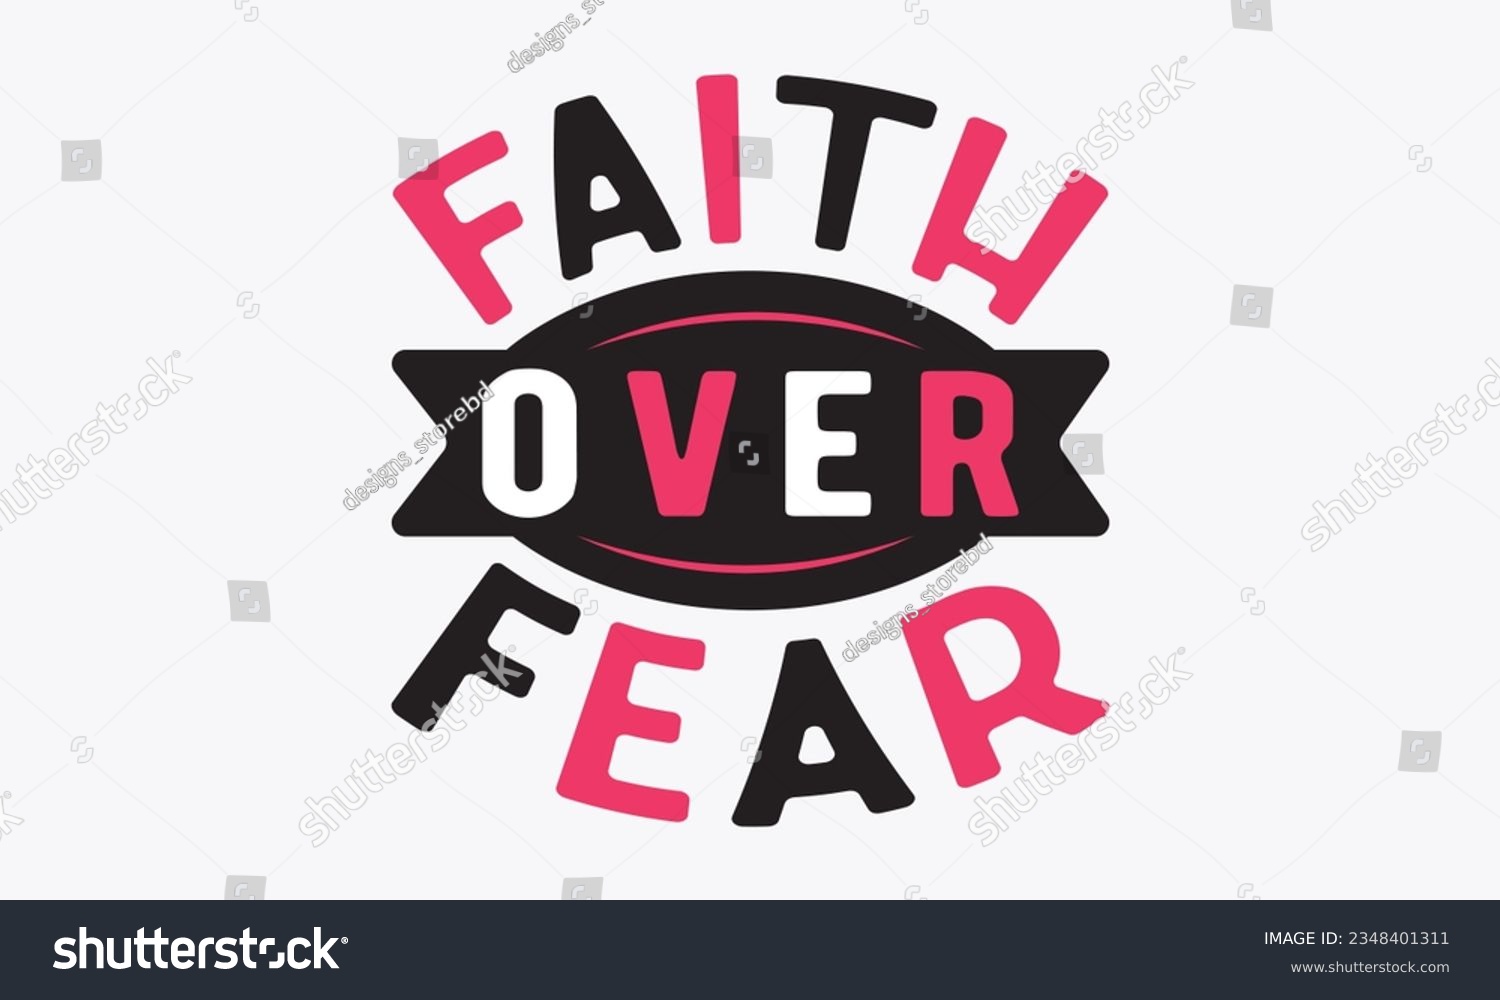 SVG of Faith over fear svg, Breast Cancer SVG design, Cancer Awareness, Instant Download, Breast Cancer Ribbon svg, cut files, Cricut, Silhouette, Breast Cancer t shirt design Quote bundle svg